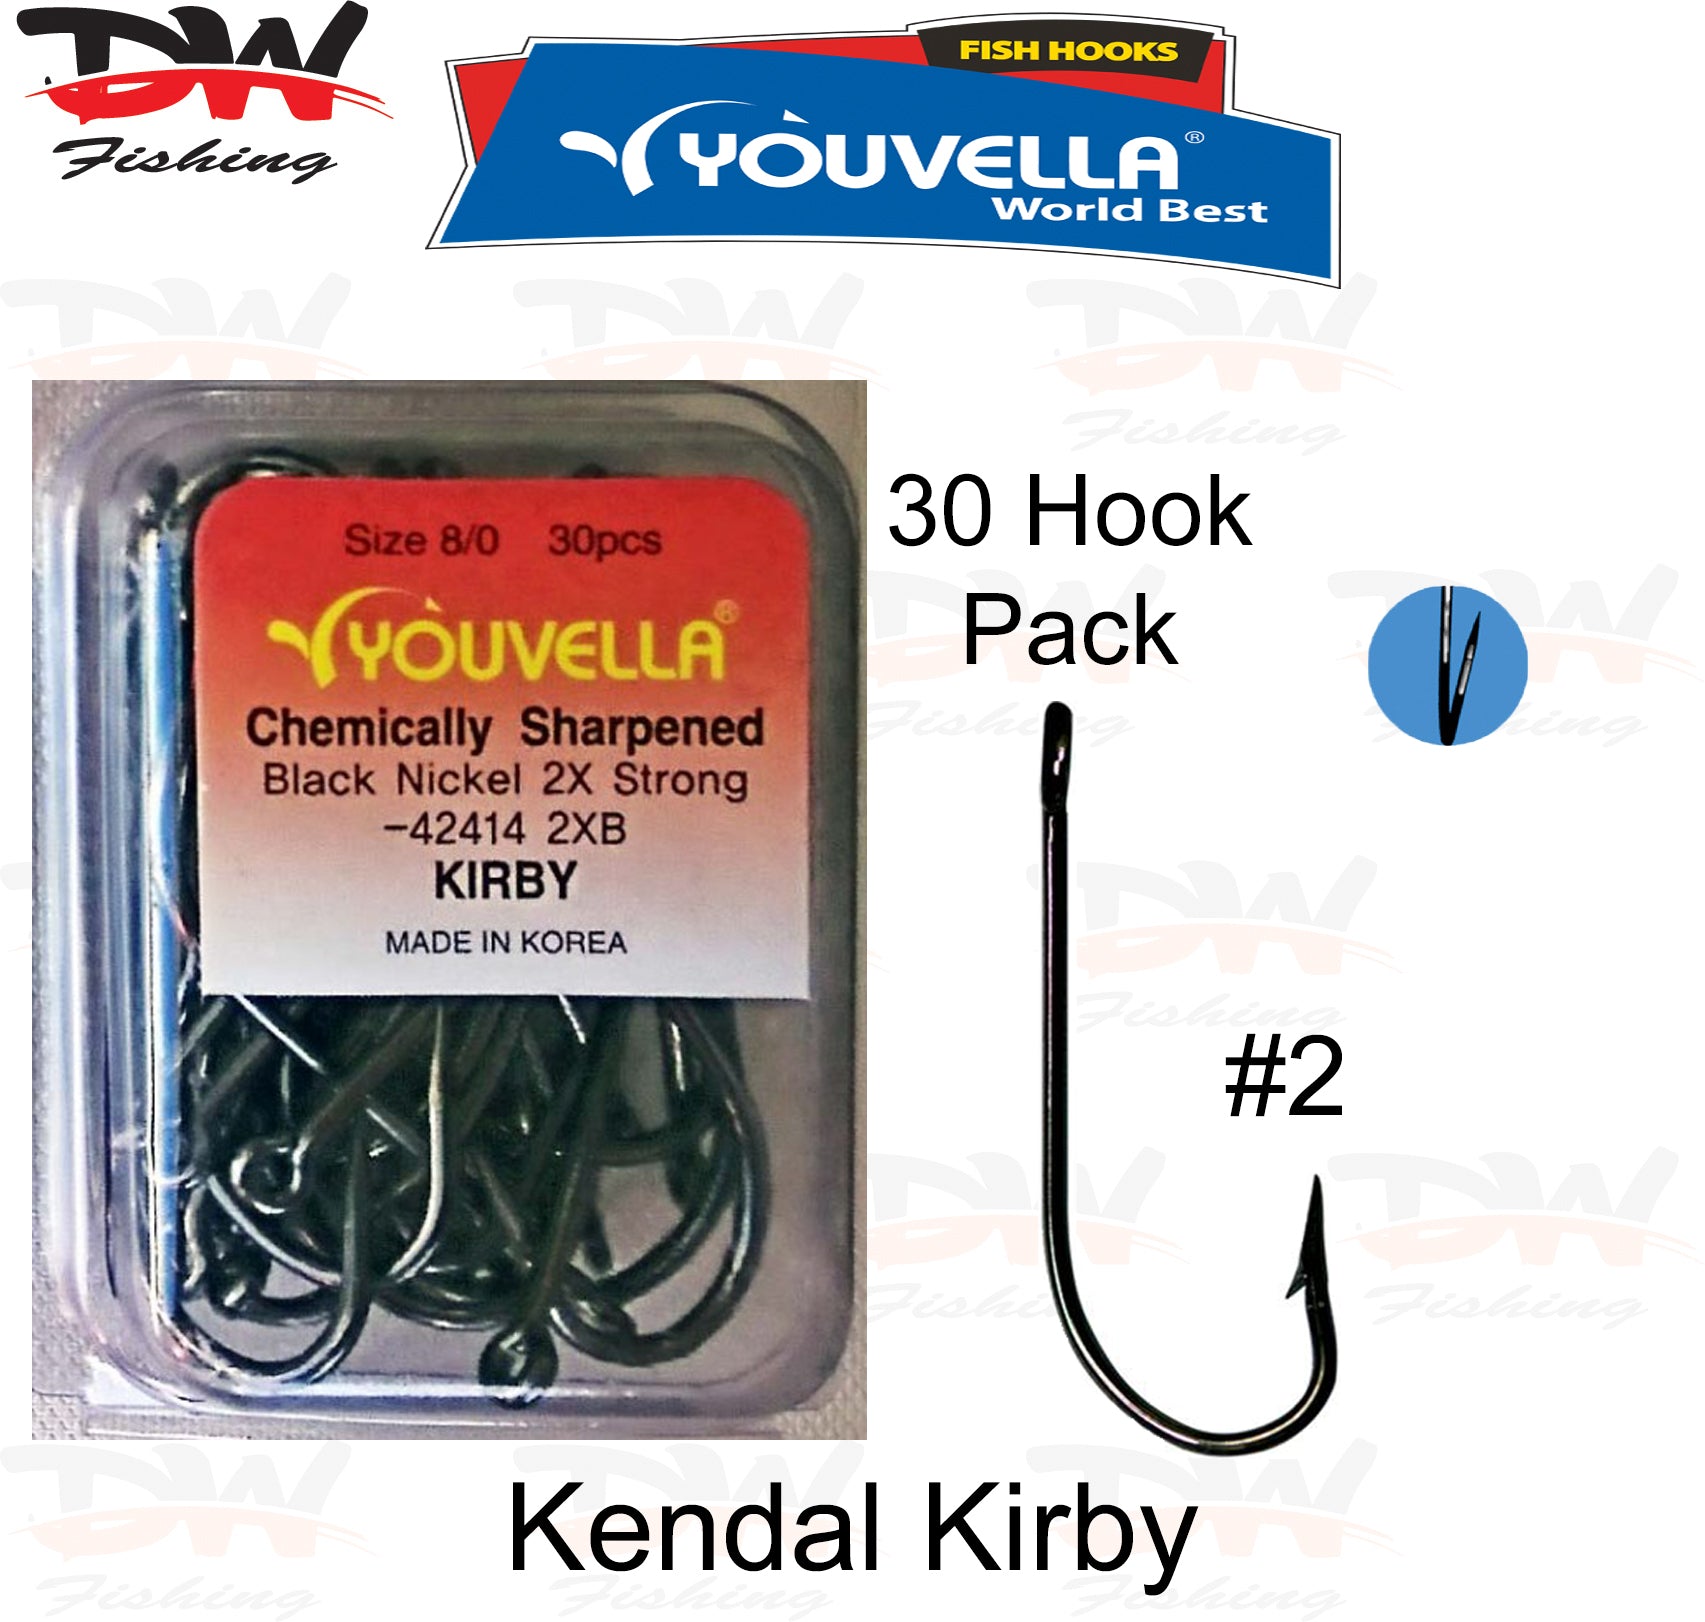 Youvella Kendal Kirby size #2 fish hook 30 pack